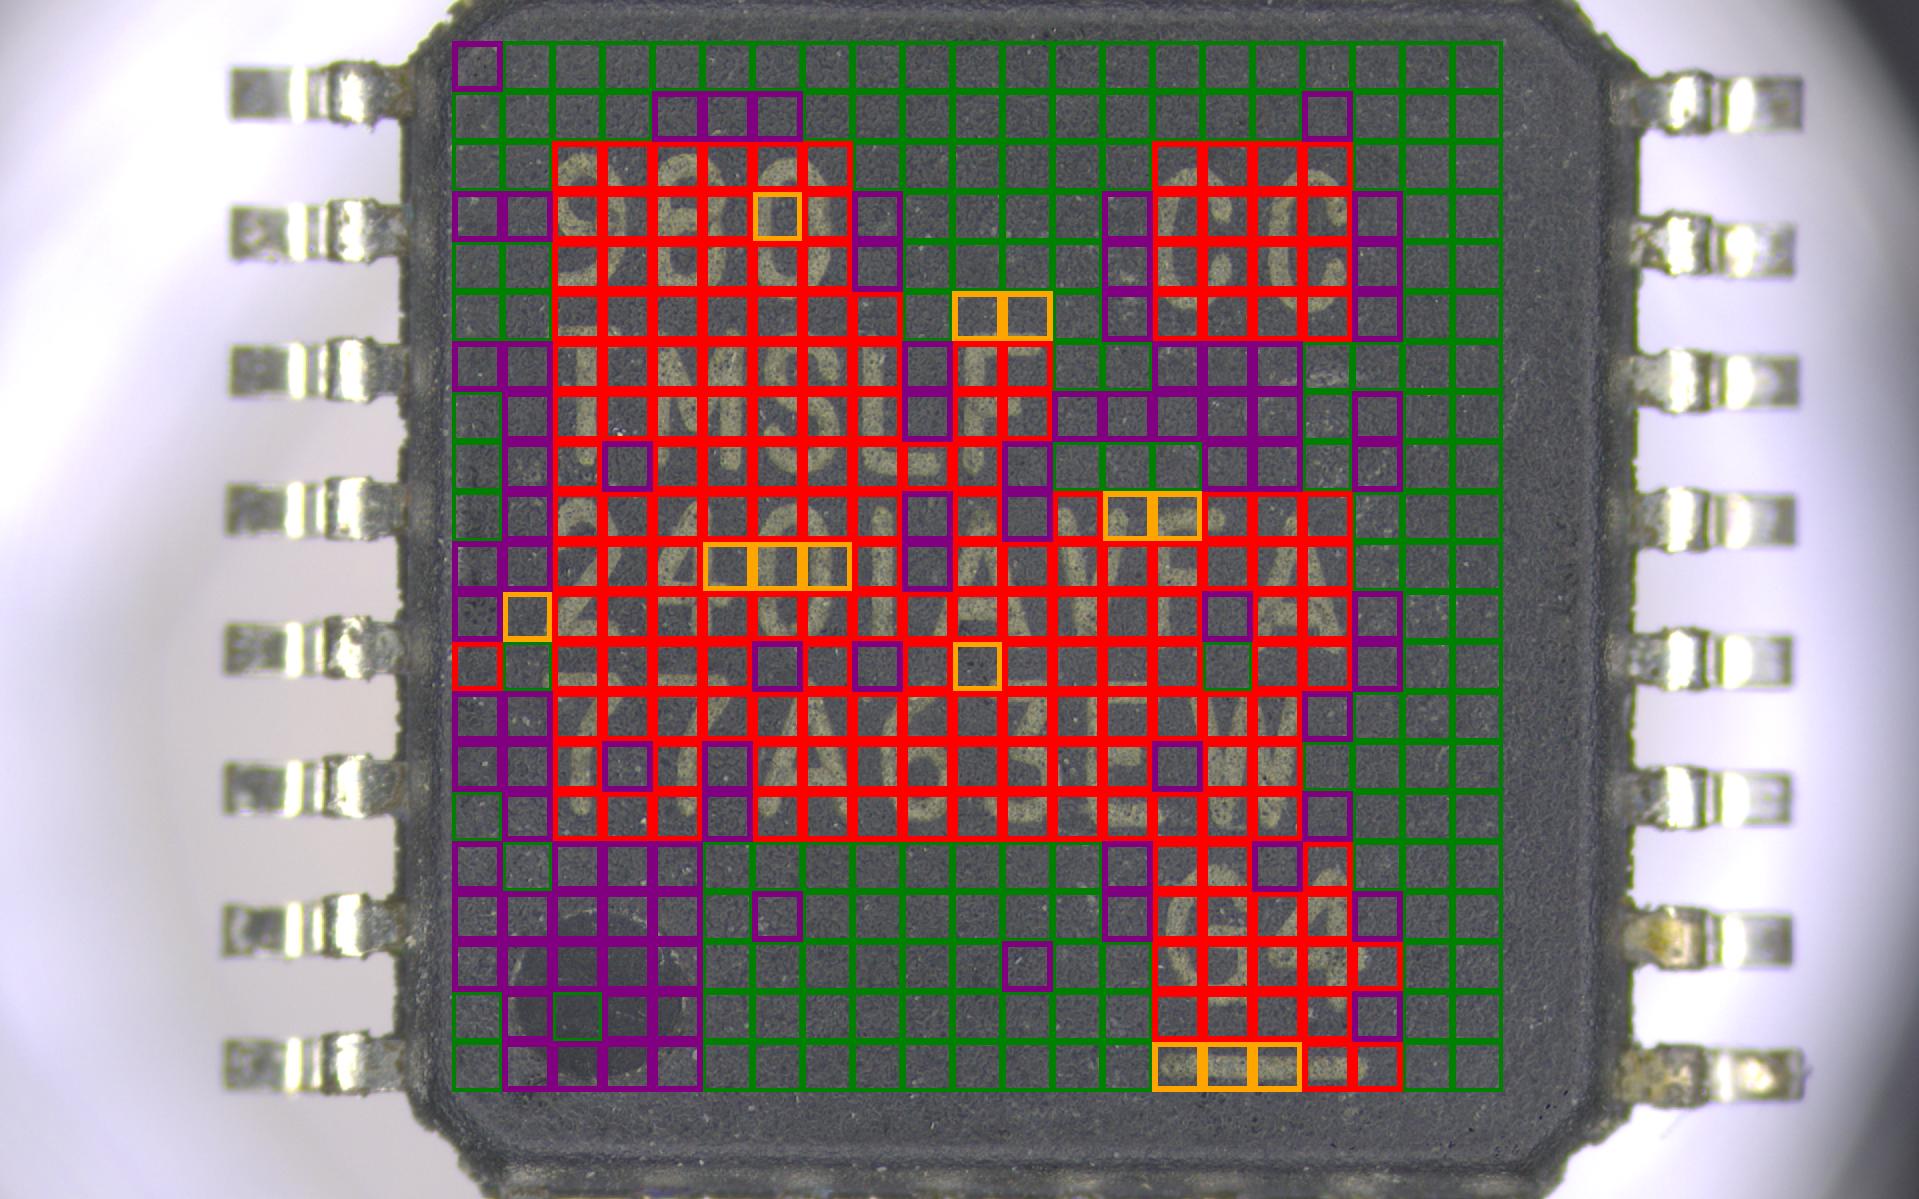 Close-up image of a computer chip with a grid of red, green, yellow, and purple squares on top of the chip.